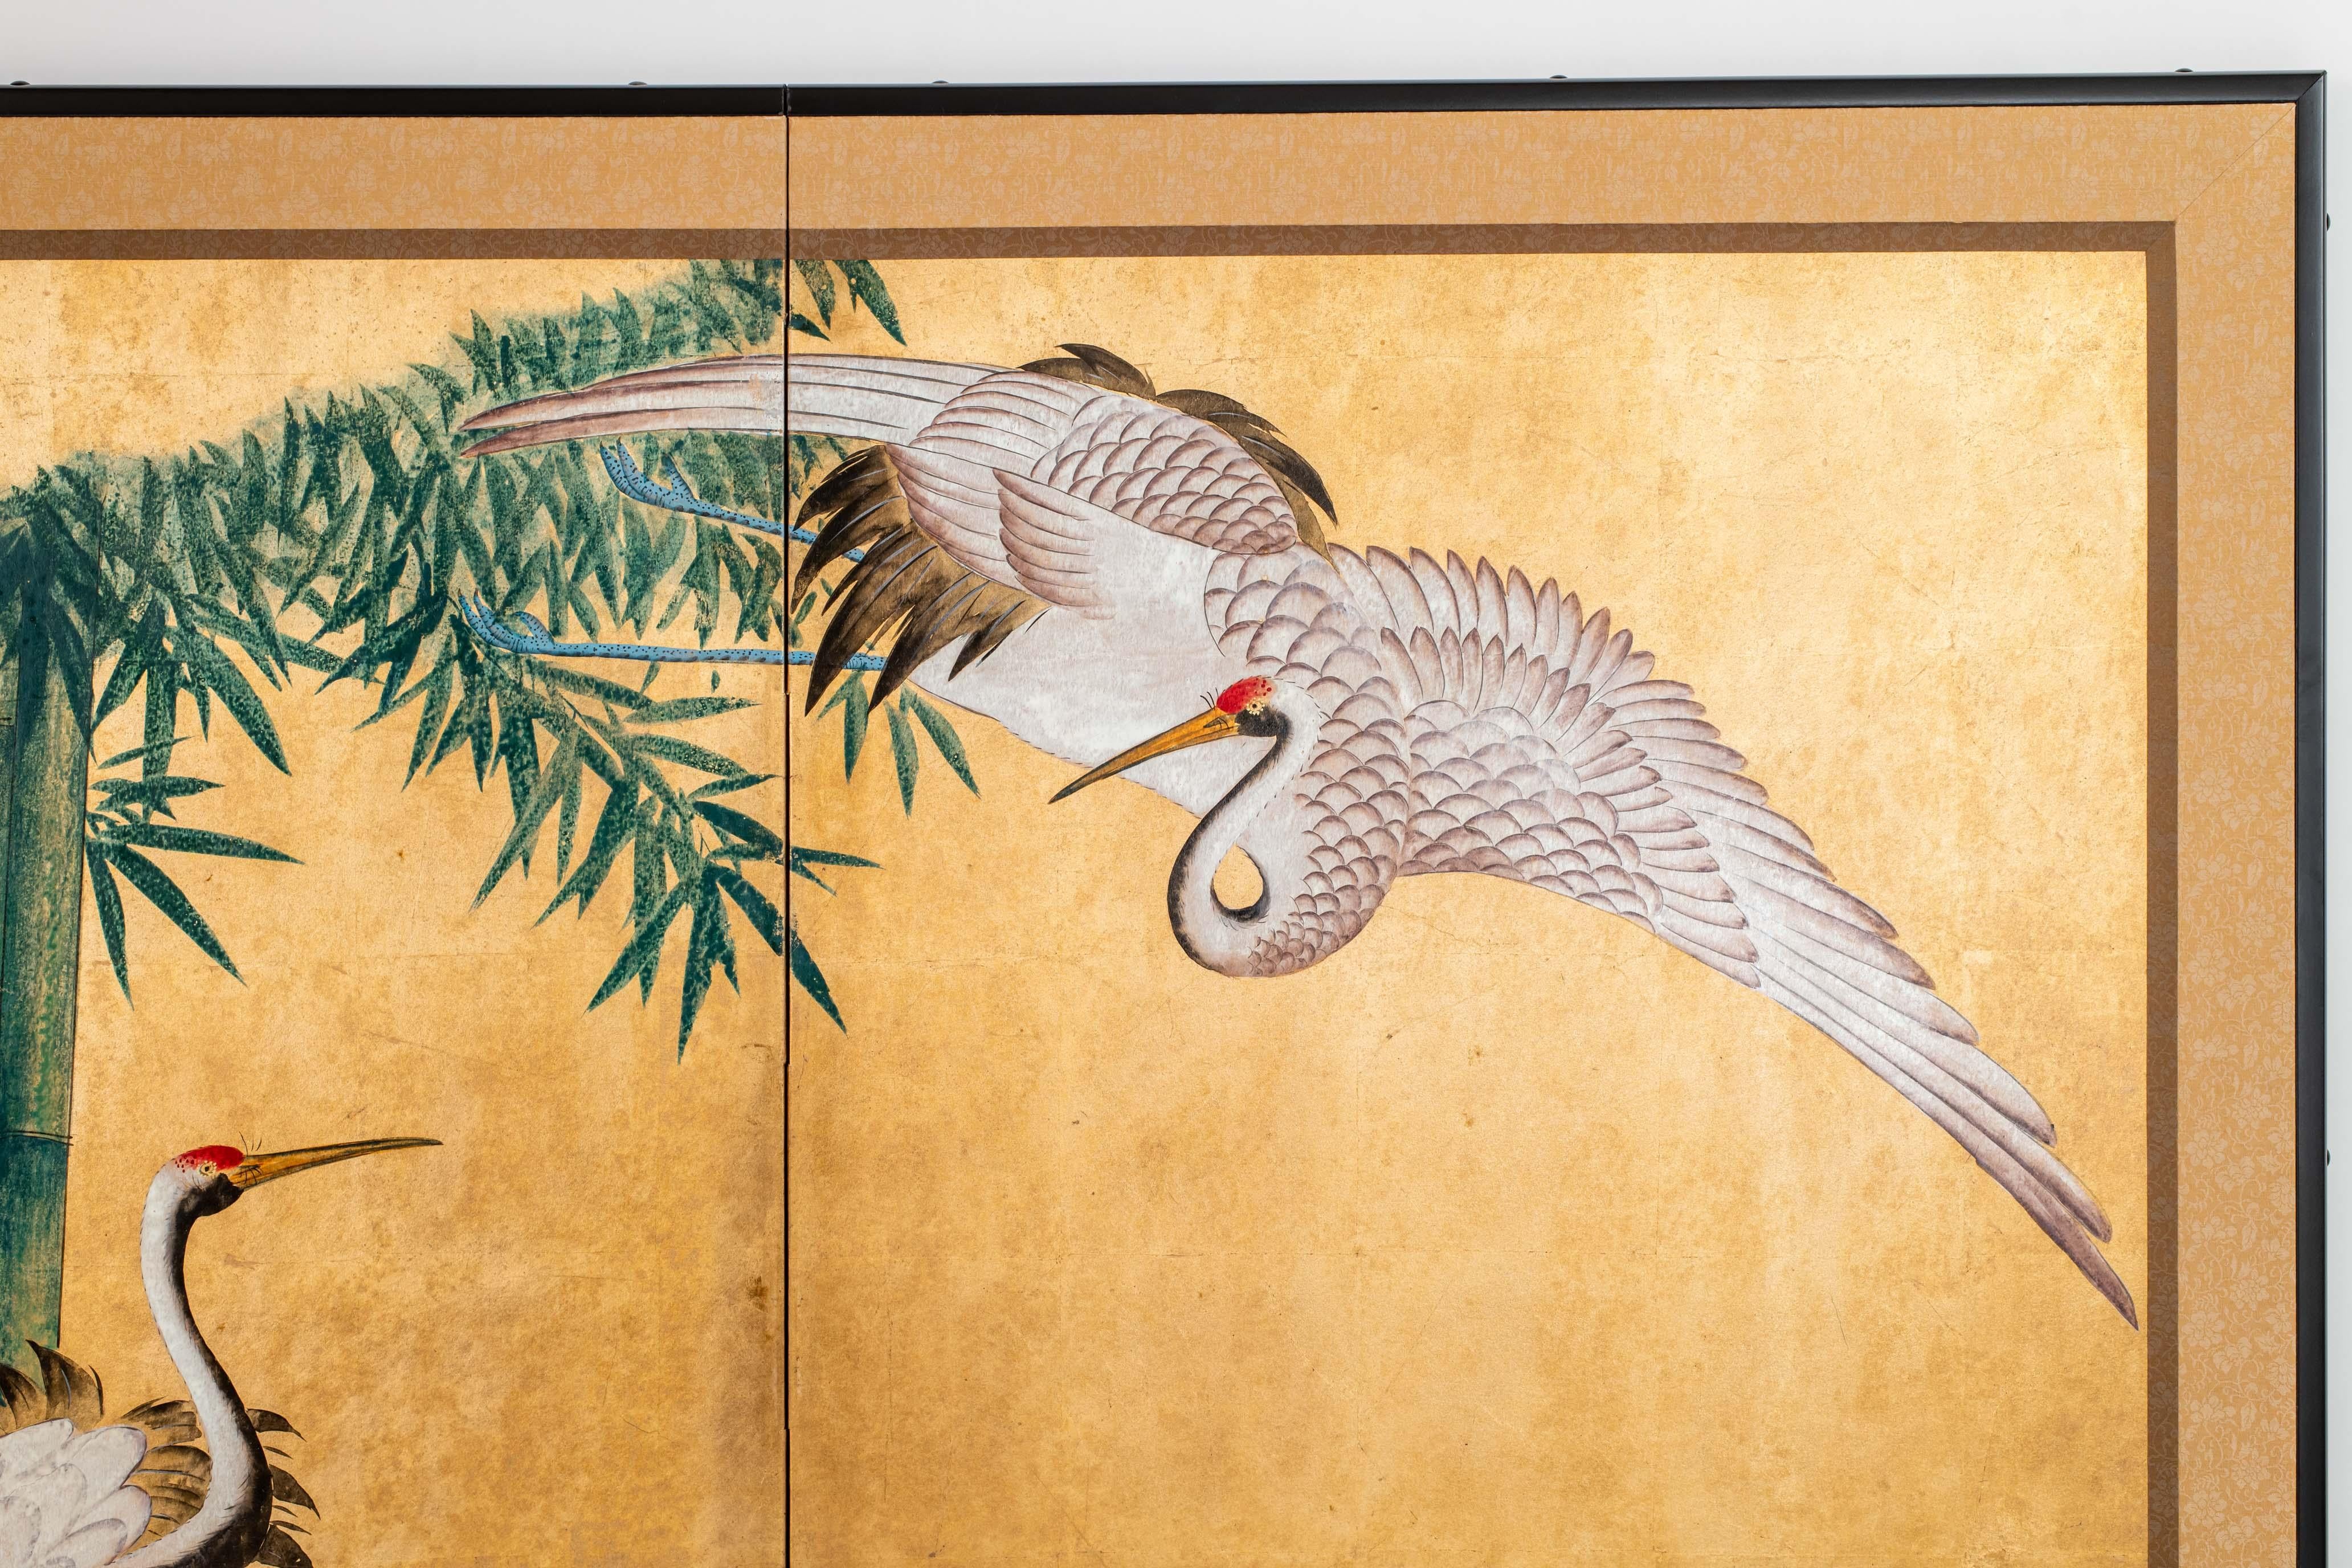 Contemporary Hand-Painted Japanese Screen of Cranes by the River 1